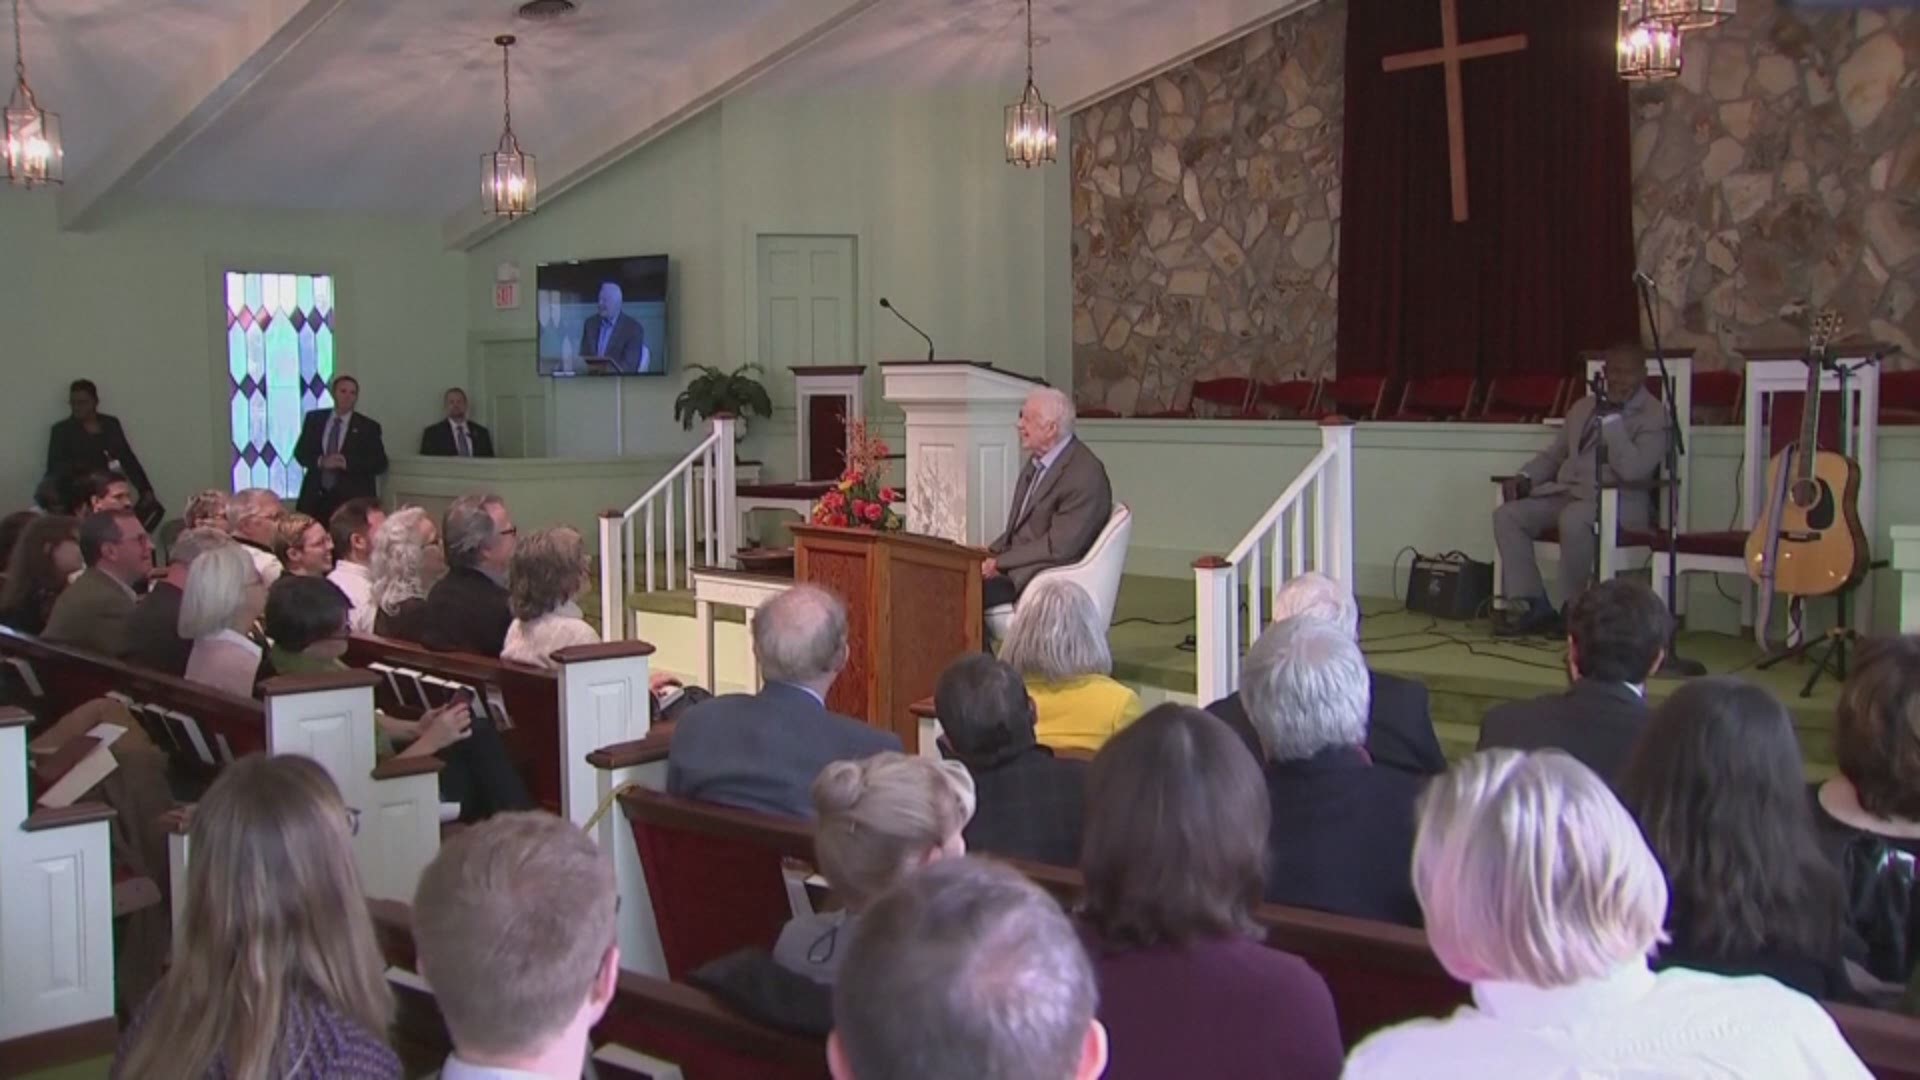 After suffering two bad falls in his home in Georgia, President Carter is back to teaching Sunday school. During the last fall he fractured his pelvis.